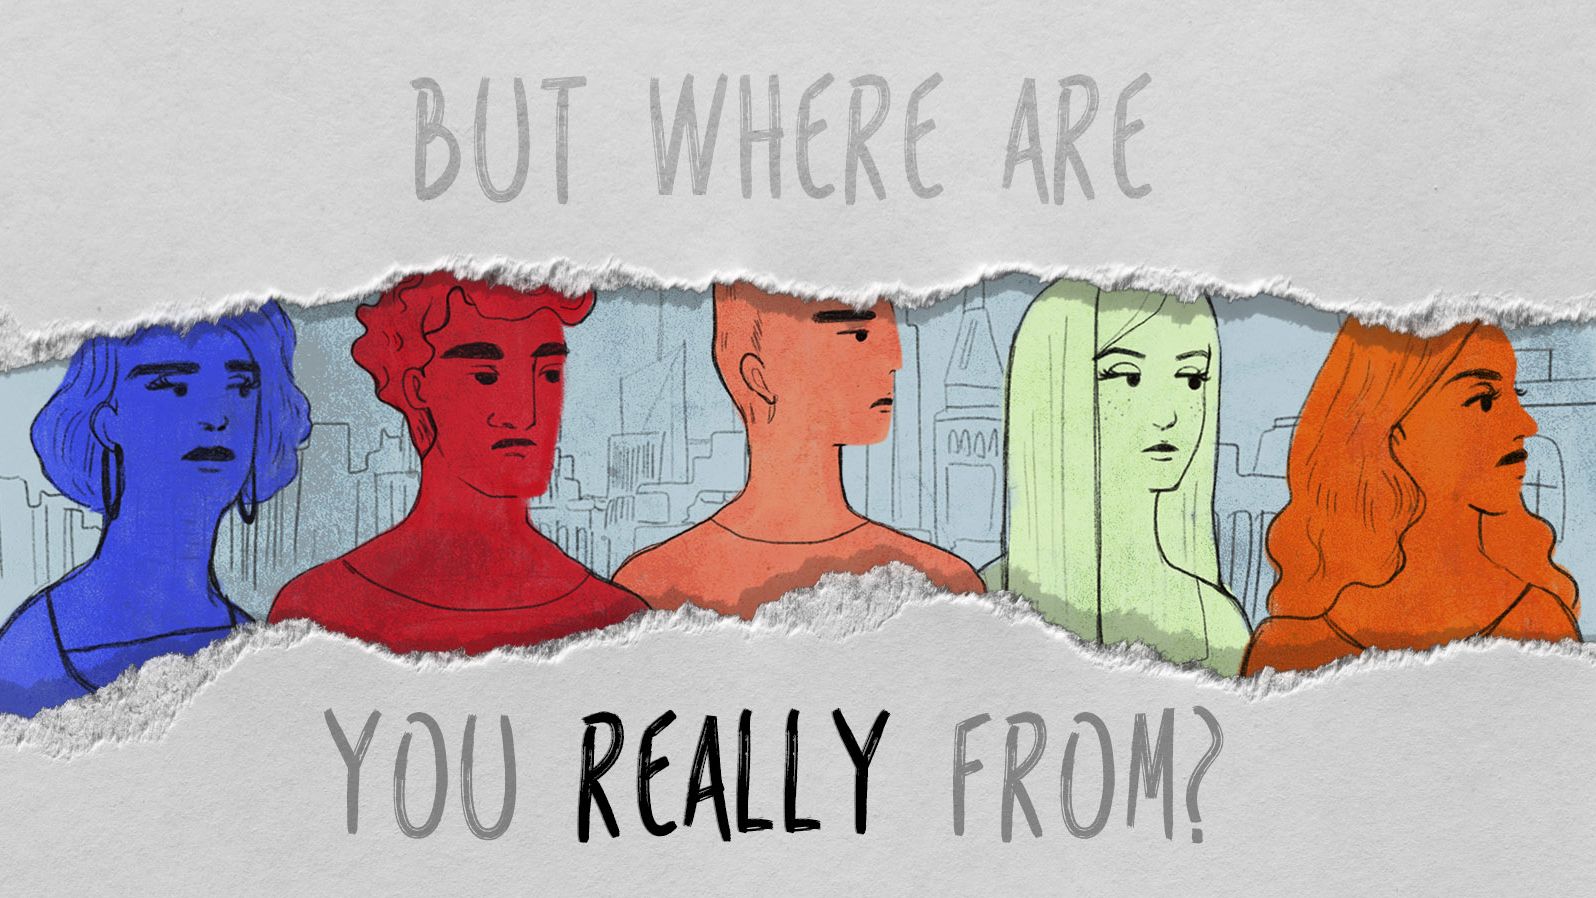 Where are you really from graphic